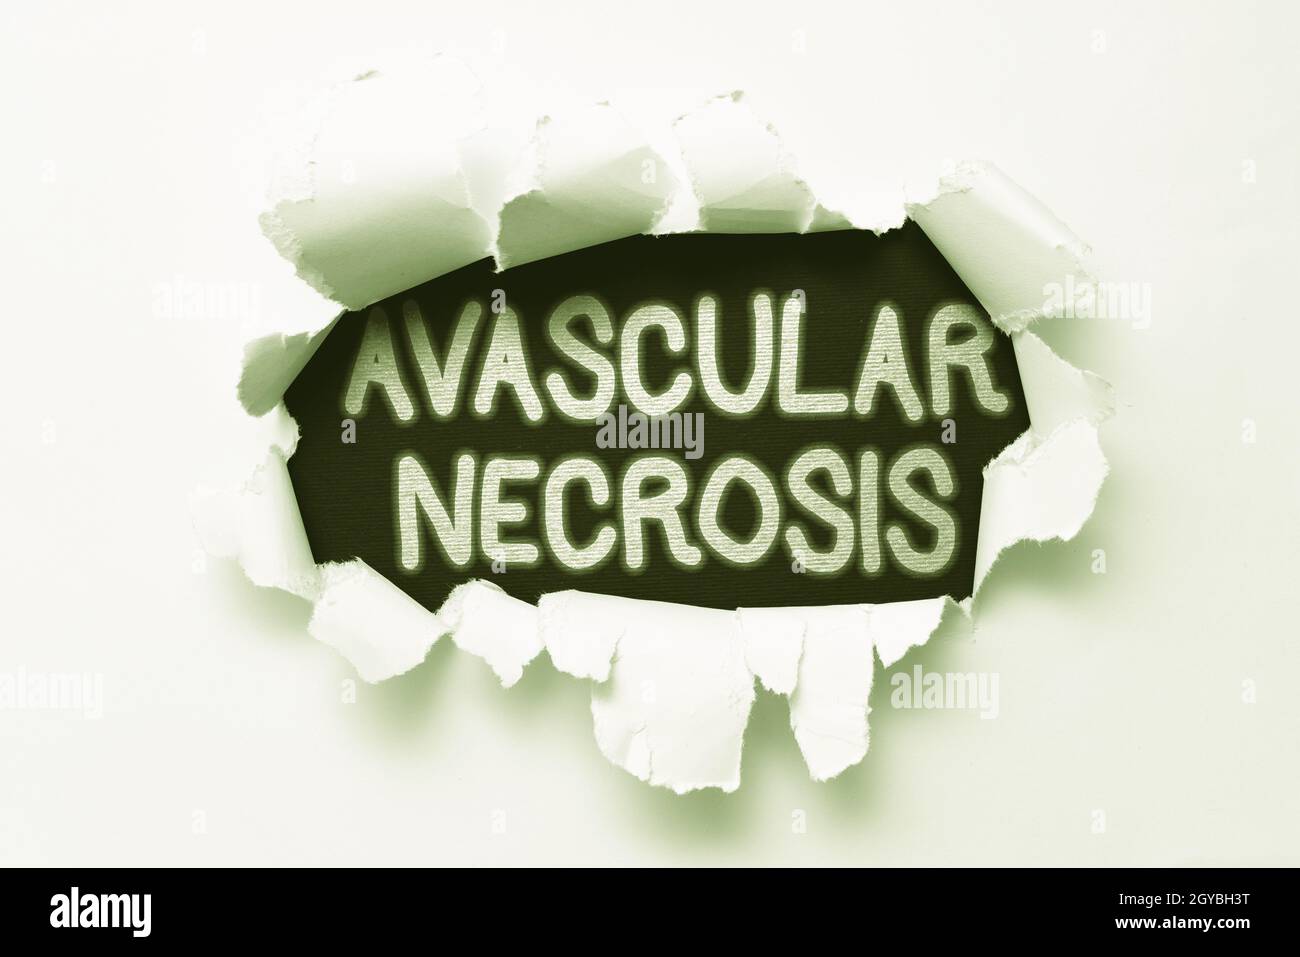 Text sign showing Avascular Necrosis, Concept meaning death of bone tissue due to a lack of blood supply Tear on sheet reveals background behind the f Stock Photo